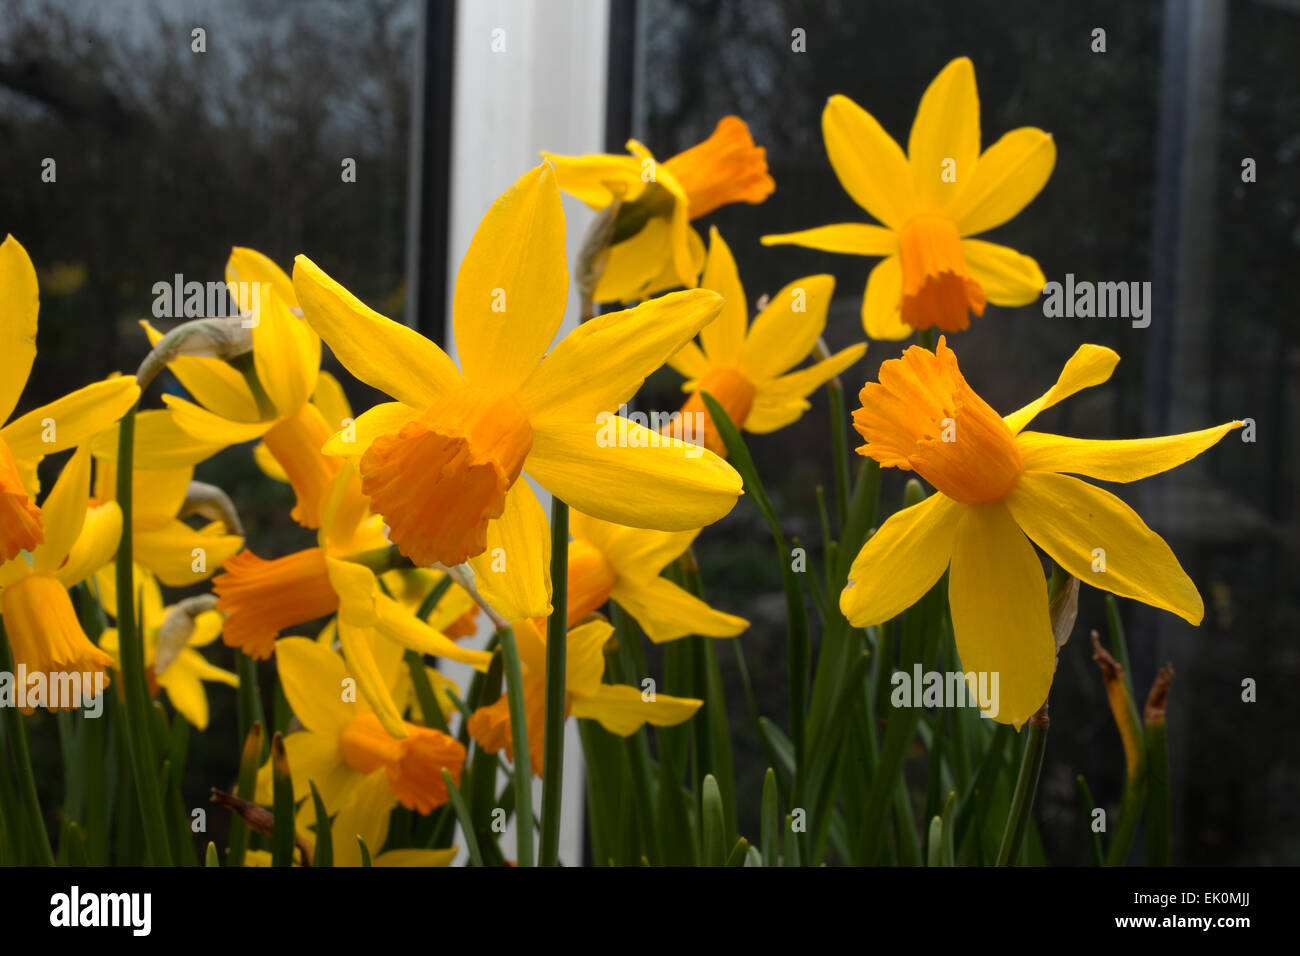 Dwarf Daffodil narcissus tete a tete Jetfire with its bright yellow flowers with a long trumpet-shaped centre ( corona ). Stock Photo